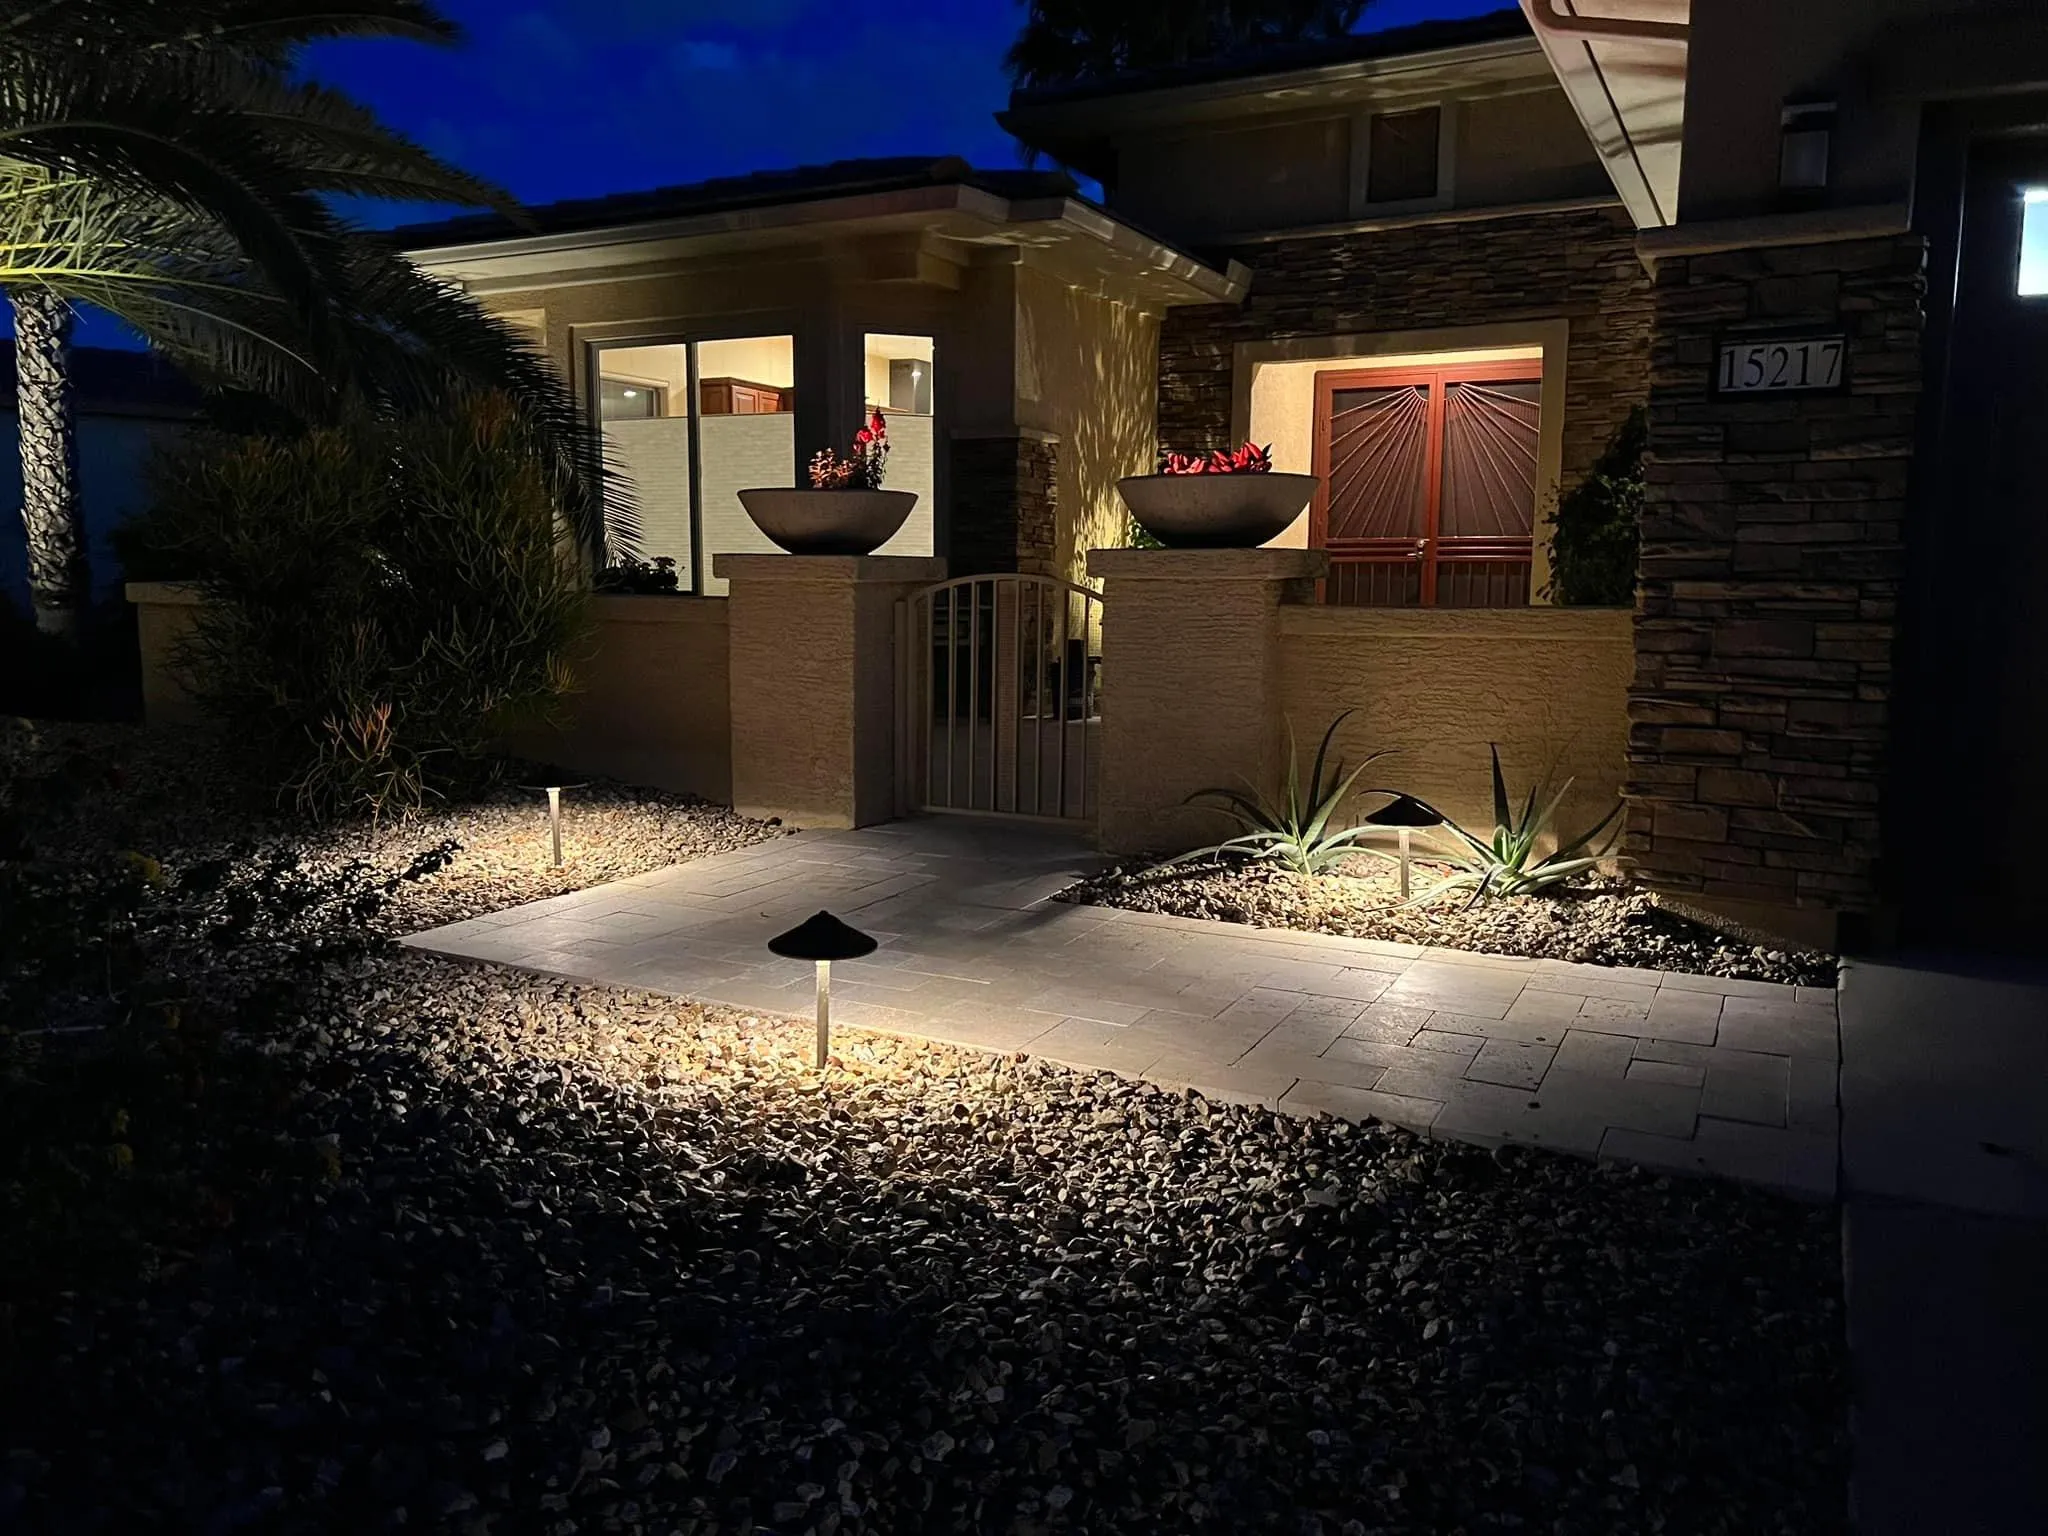 System Maintenance for Atmospheric Irrigation and Lighting  in Sun City, Arizona